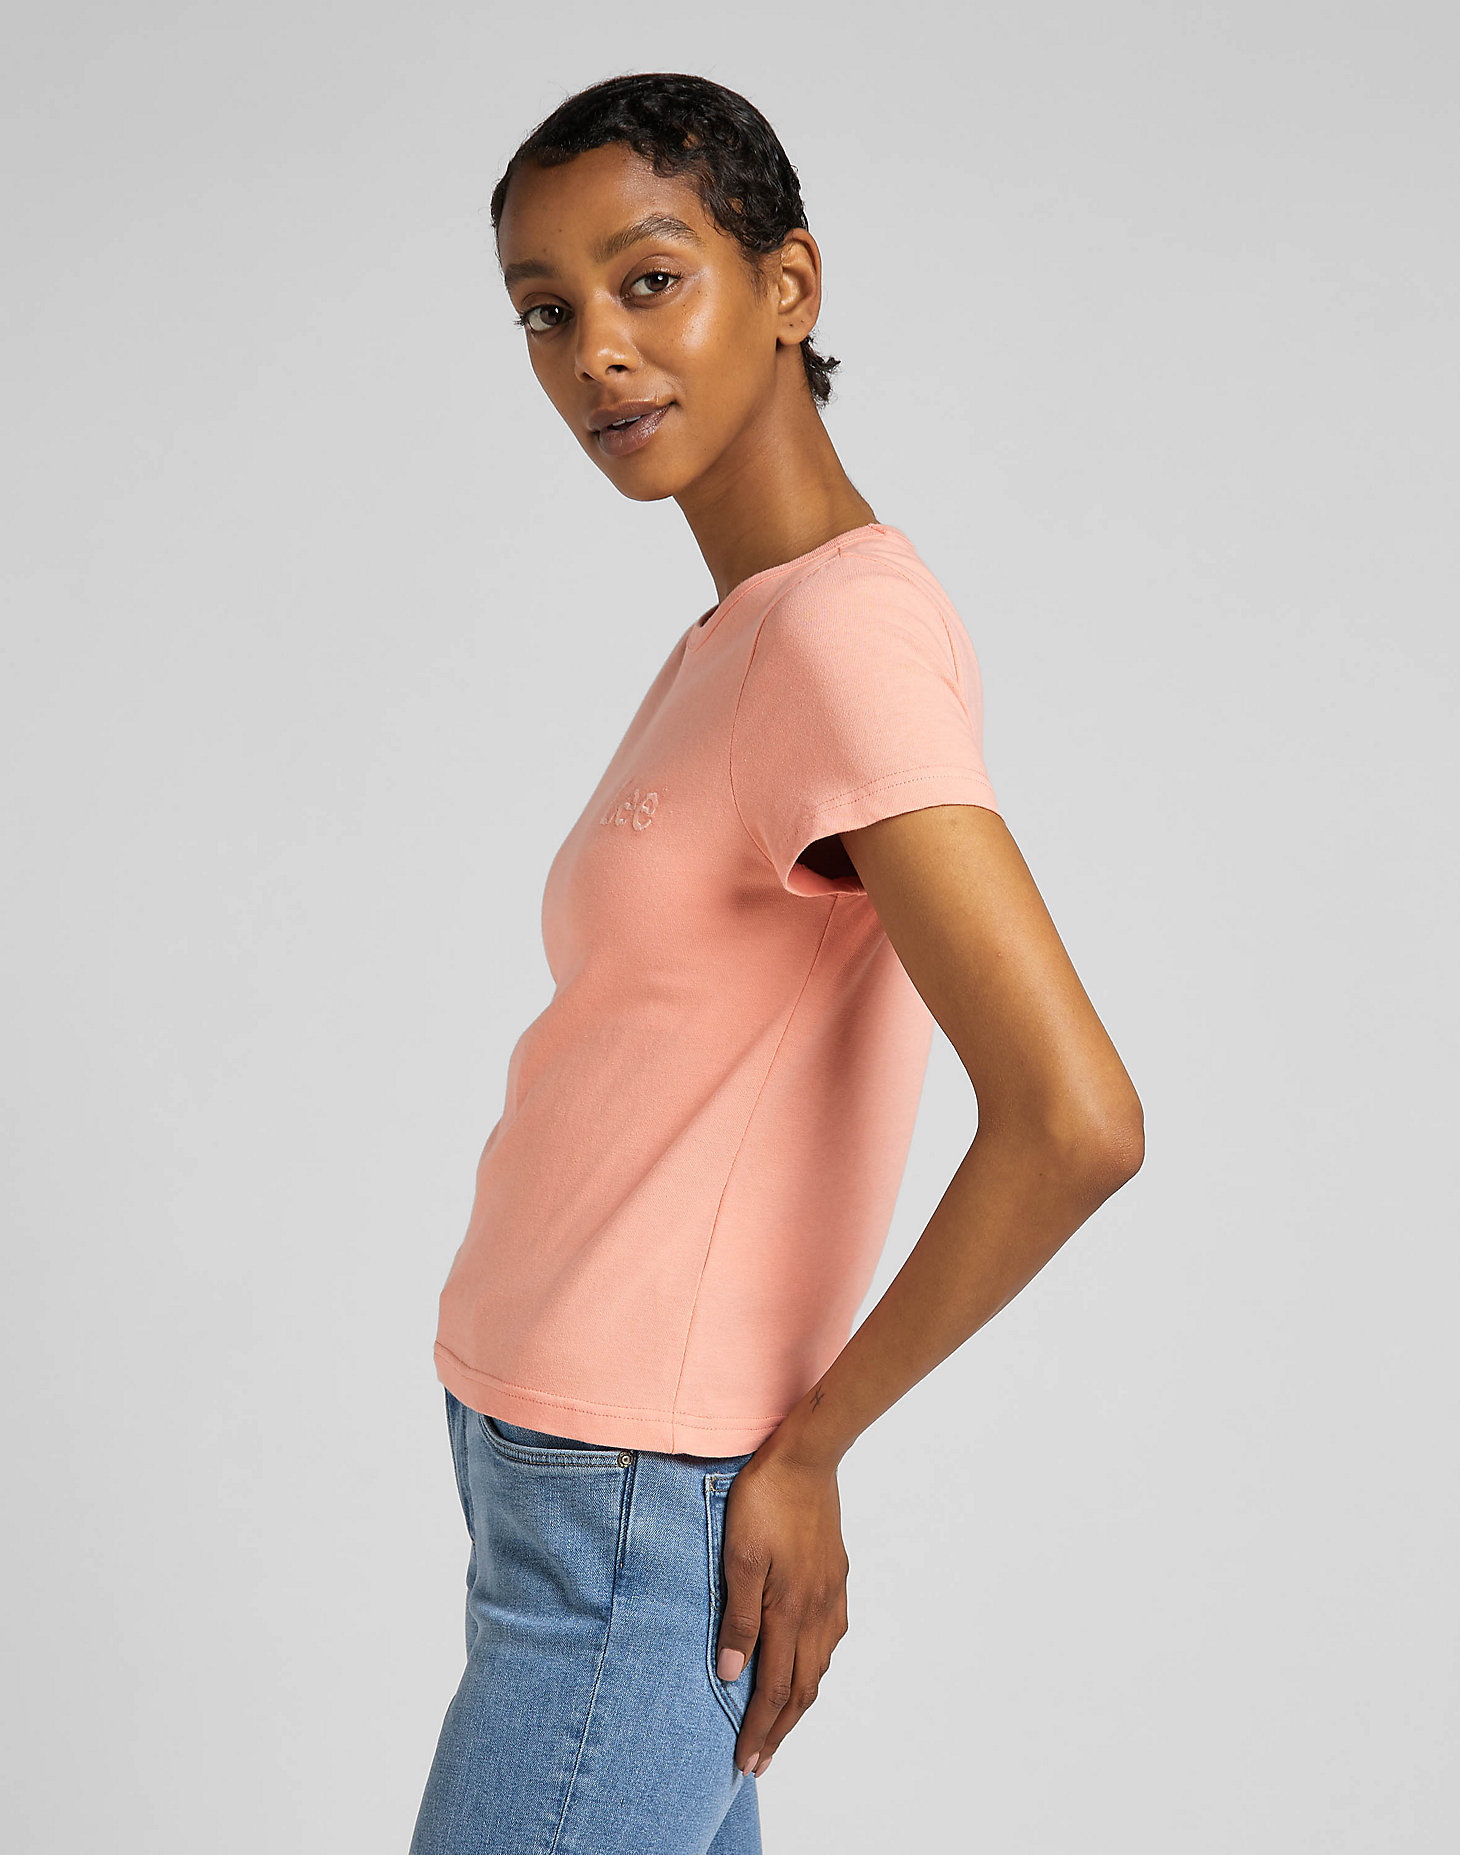 Slim Cropped Tee in Bright Coral alternative view 3